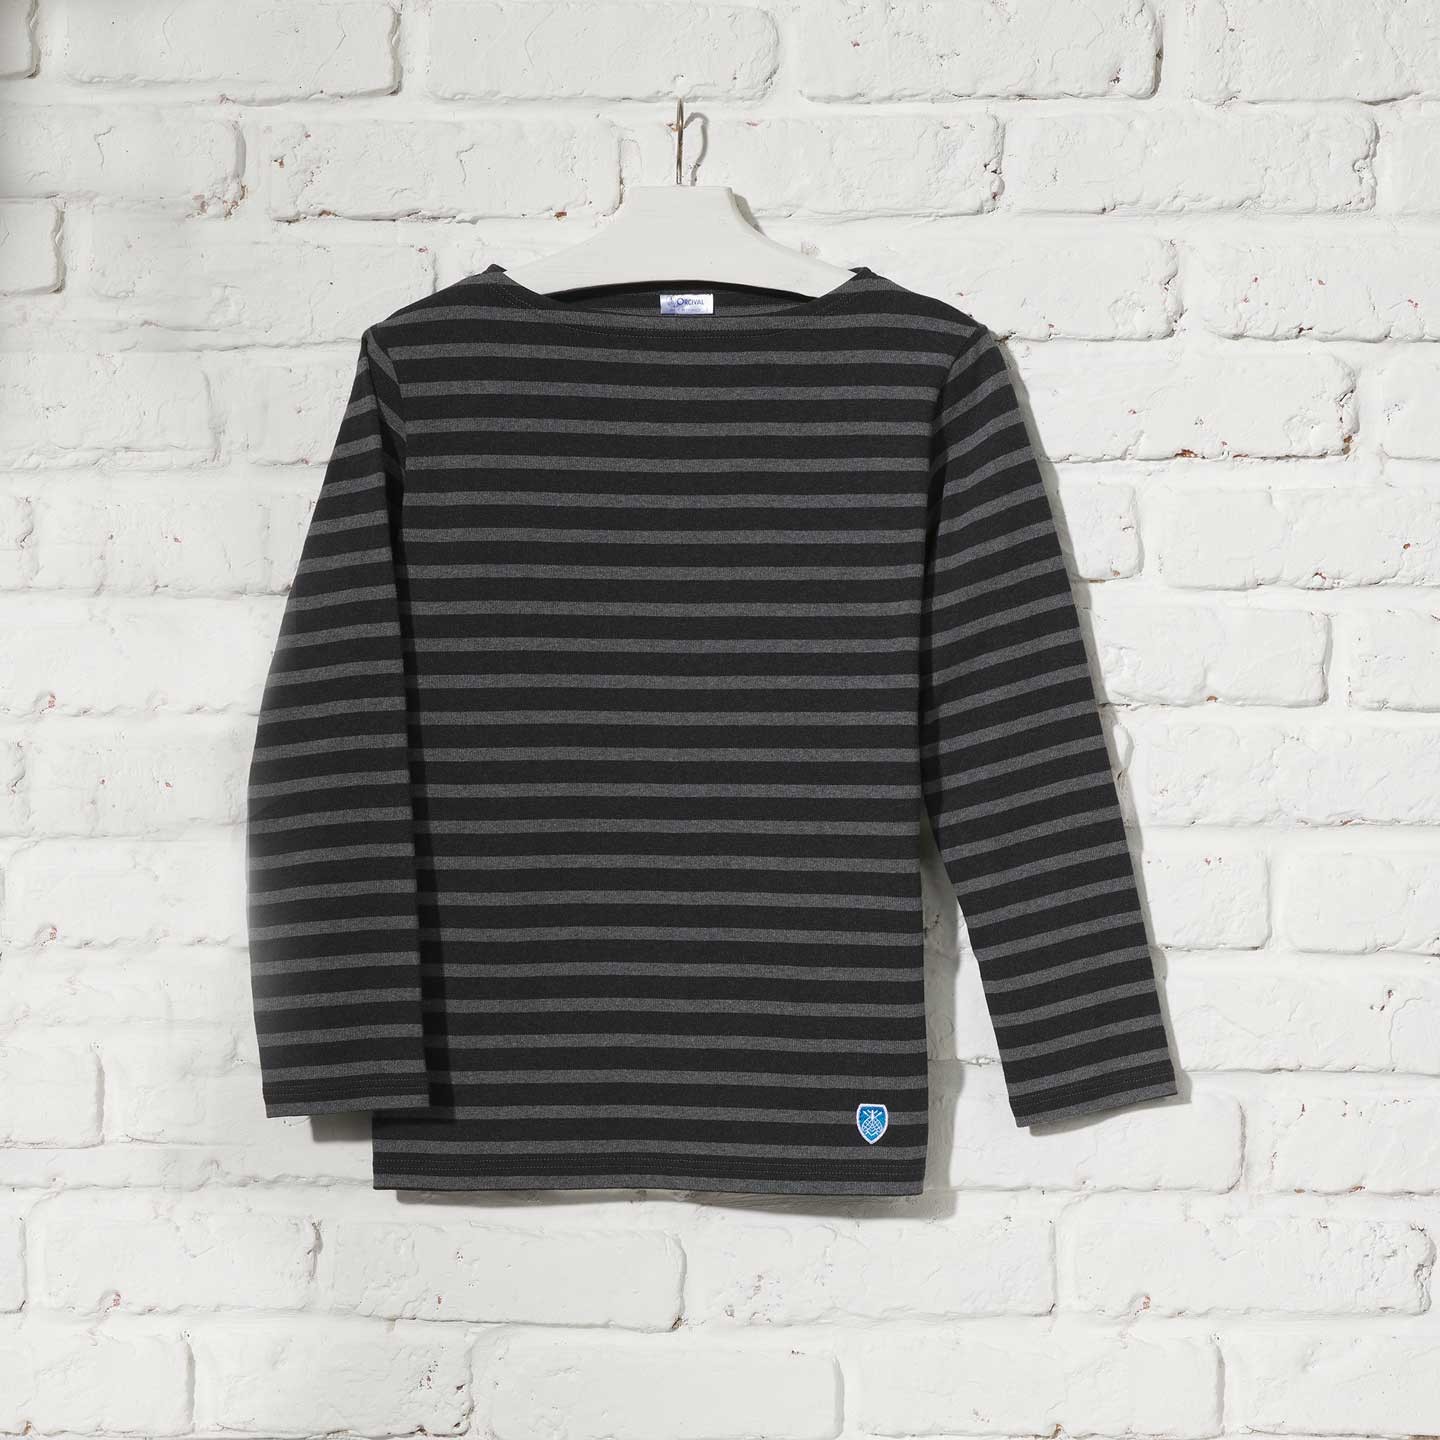 Striped shirt Darkness / Leaden Grey, unisex made in France Orcival